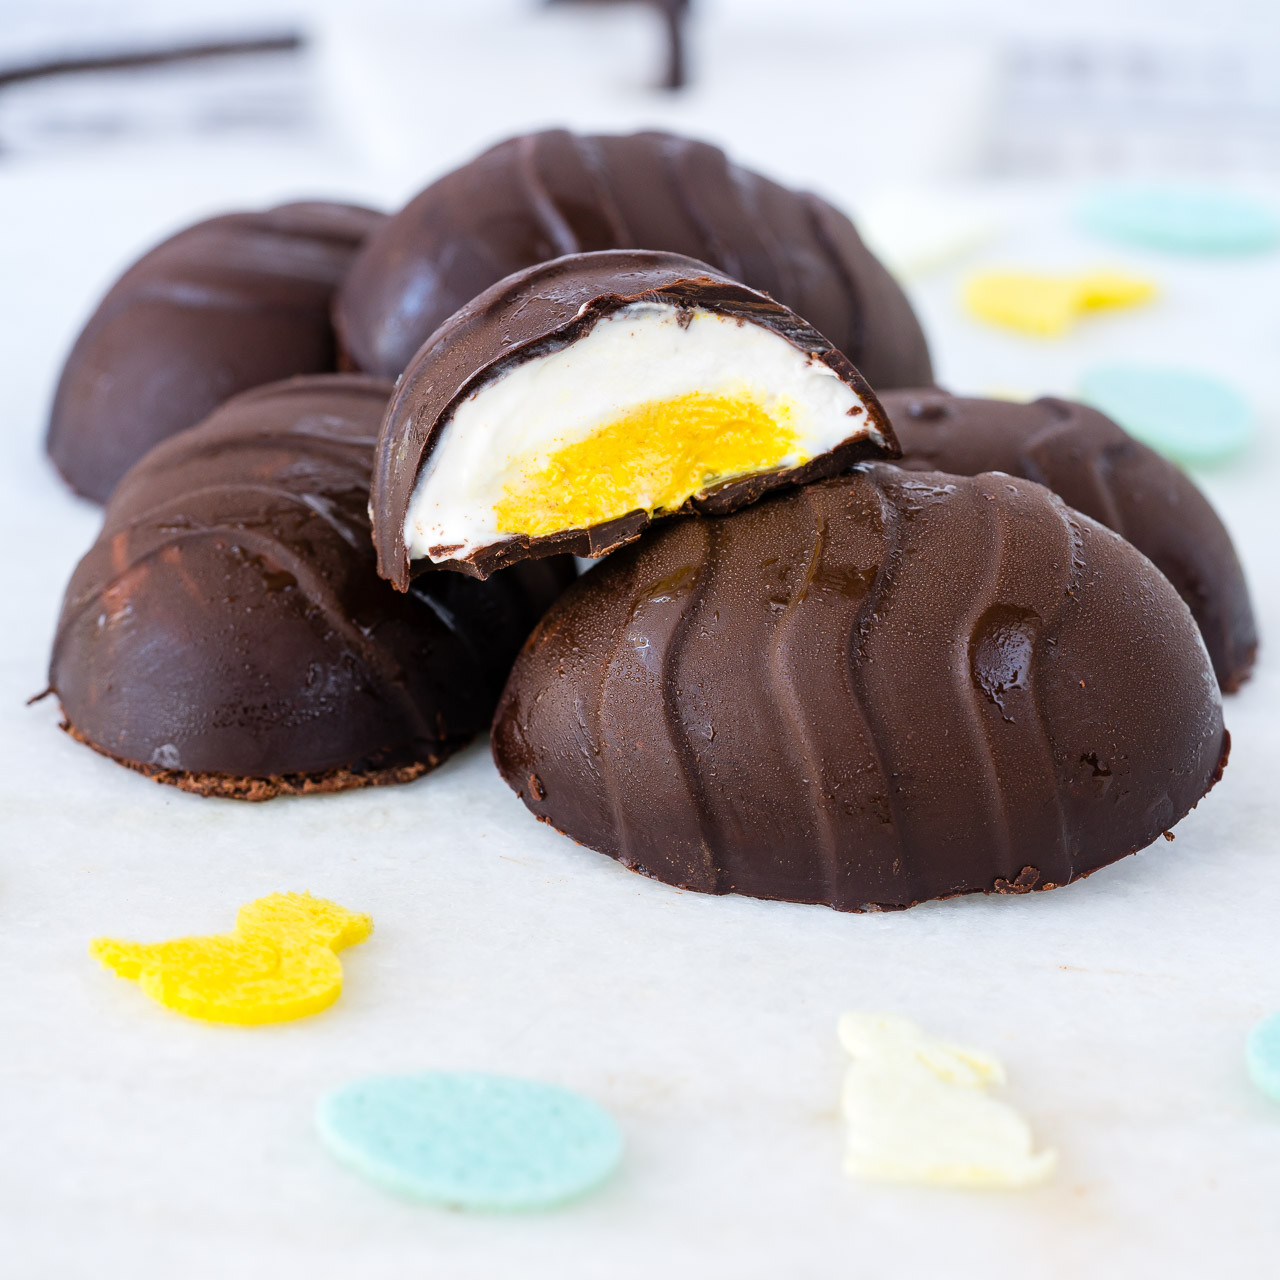 Candy Easter Eggs Recipe
 Get Creative with these Healthy Chocolate Yogurt filled